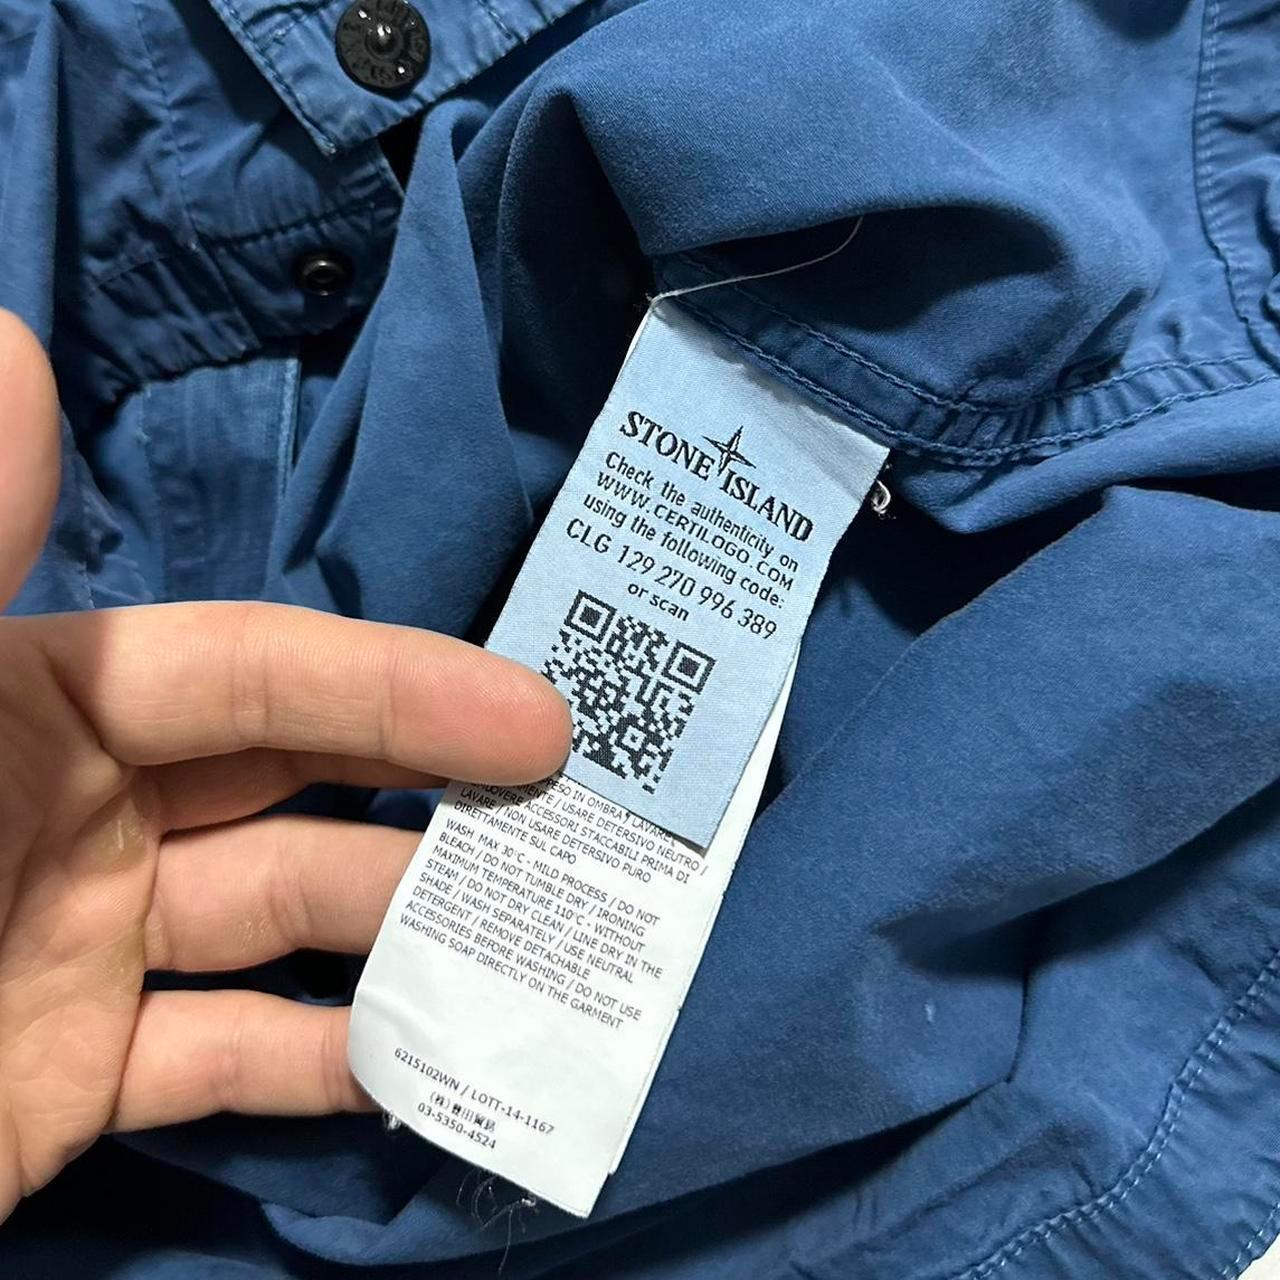 Stone Island Blue Double Pocket Overshirt - Known Source